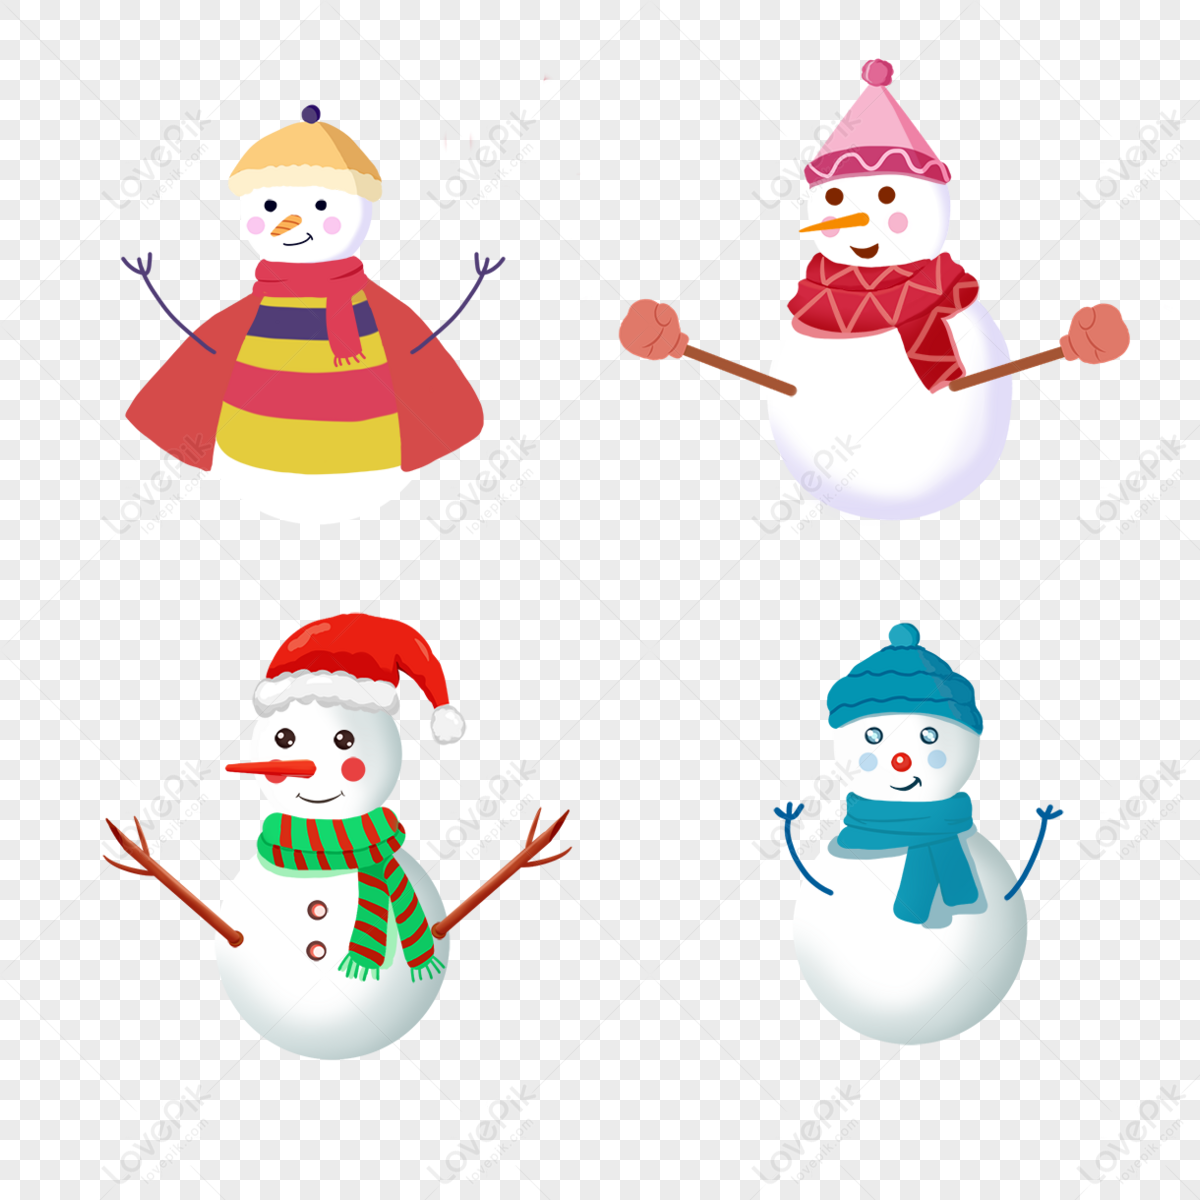 https://img.lovepik.com/png/20210816/lovepik-snowman-in-a-hat-png-image_7986919.jpg_wh1200.png